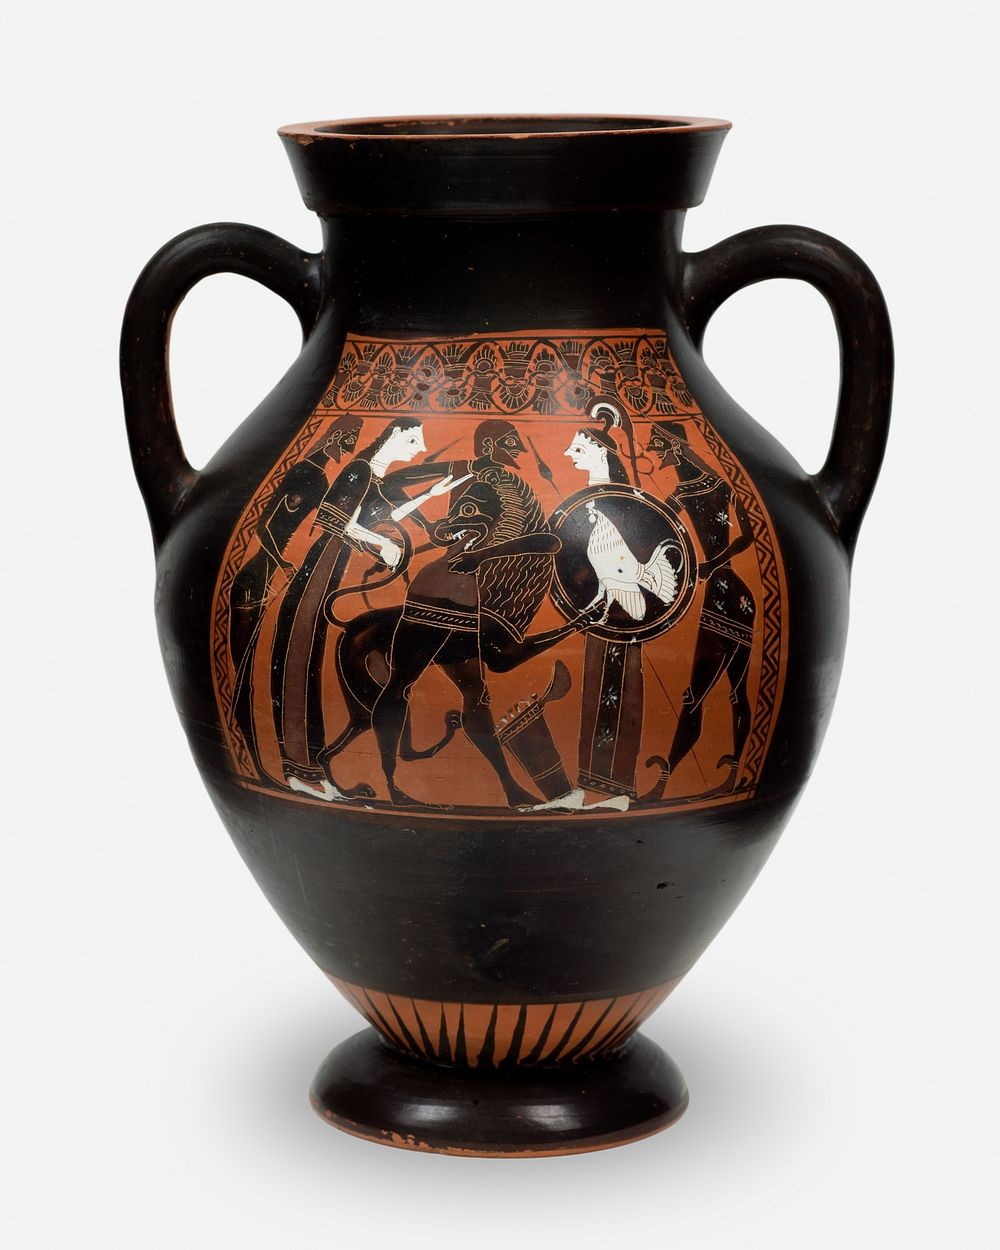 Belly-Amphora (Storage Jar) by Painter of Tarquinia RC 3984